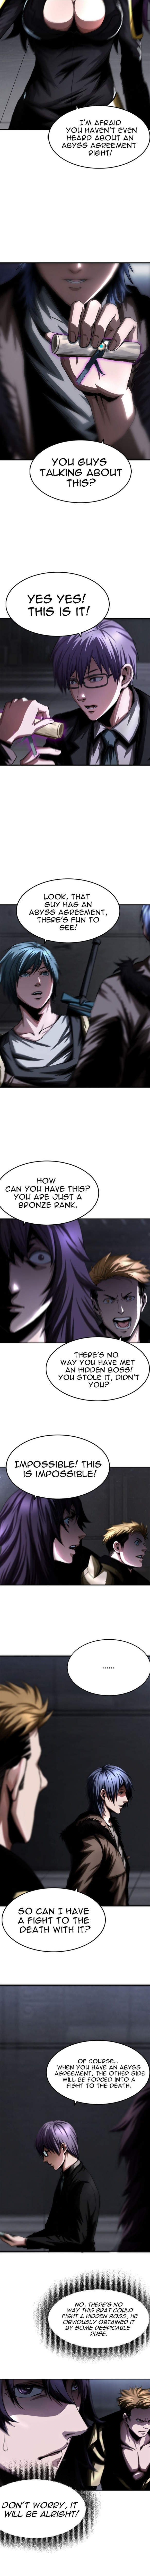 The Blade Of Evolution-Walking Alone In The Dungeon Chapter 11 page 6